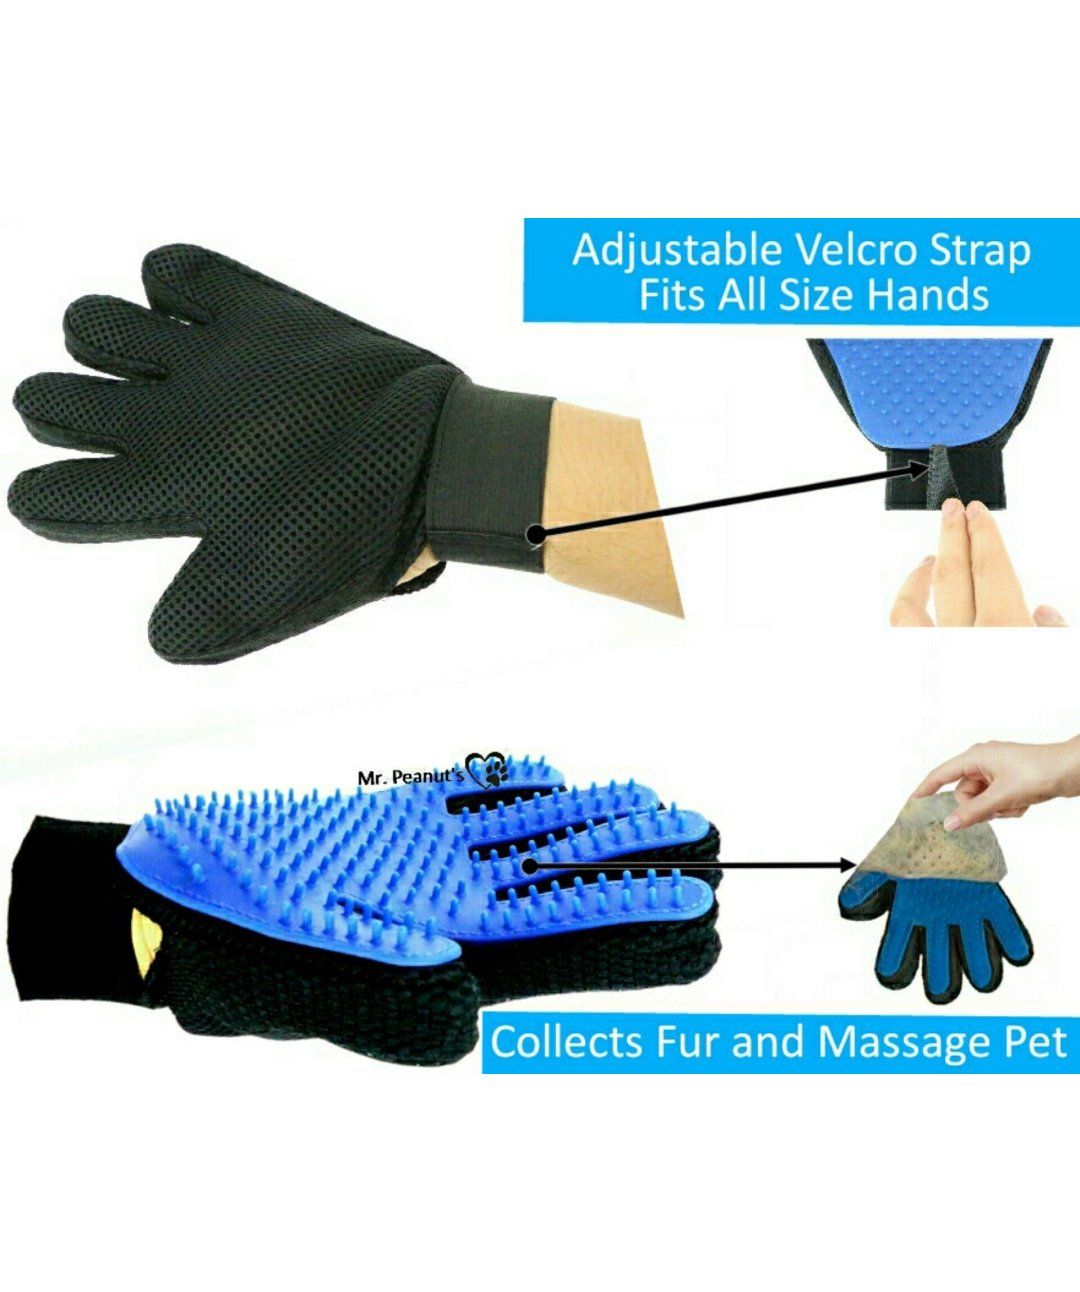 Mr. Peanut’s Silicone Pet Grooming Gloves - Set of 2 Grooming Rover 